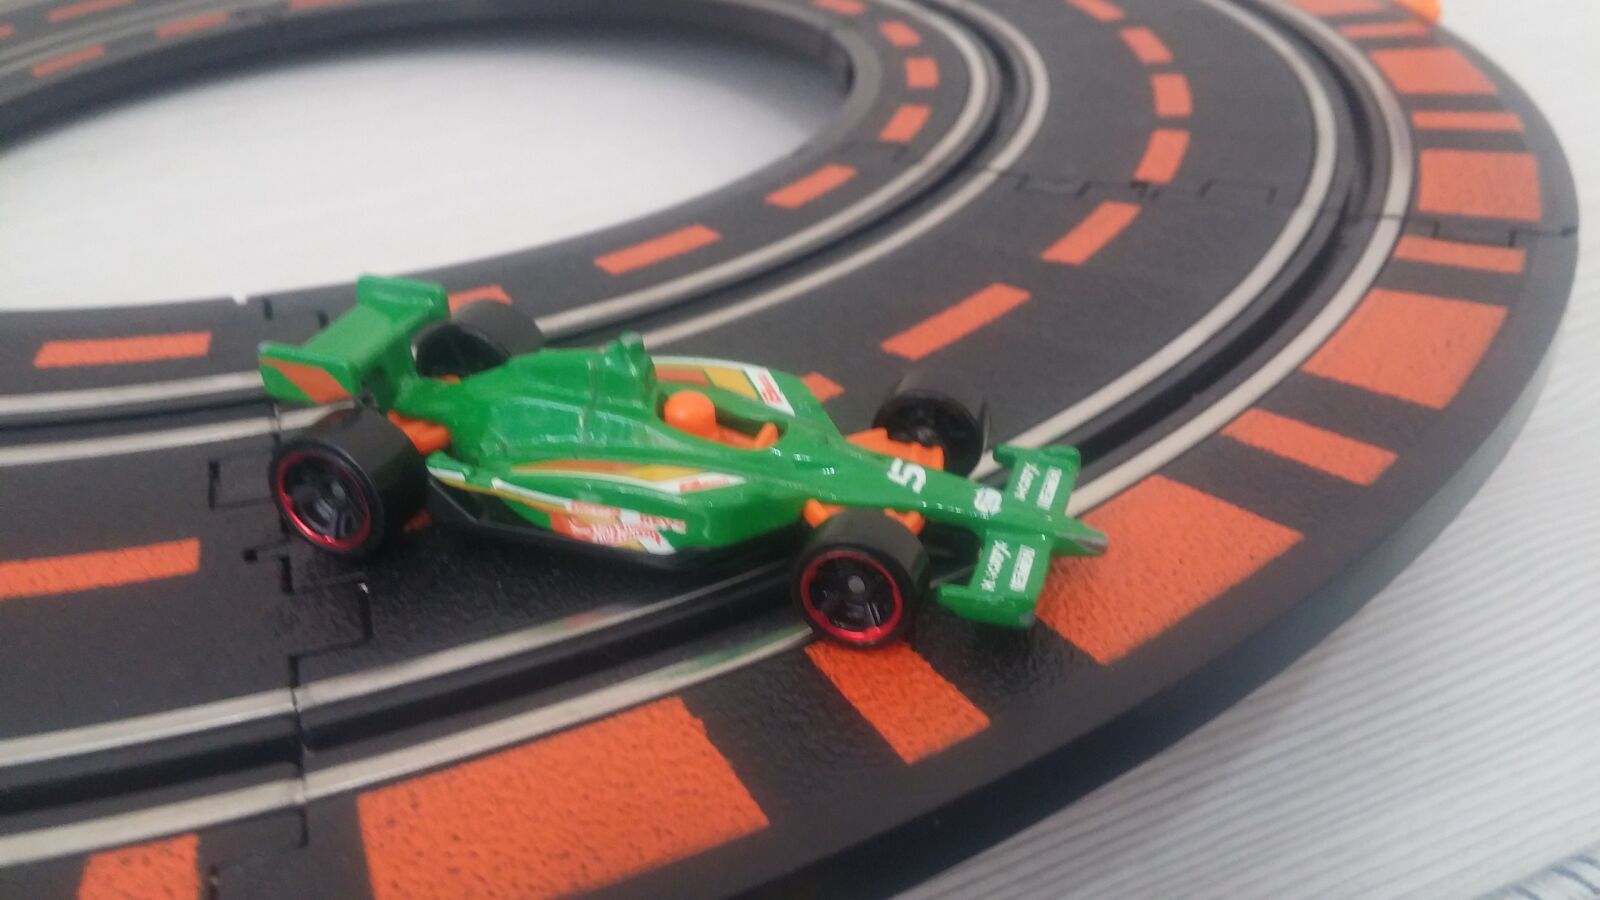 LG G3 sample photo. Green, toy, race photography